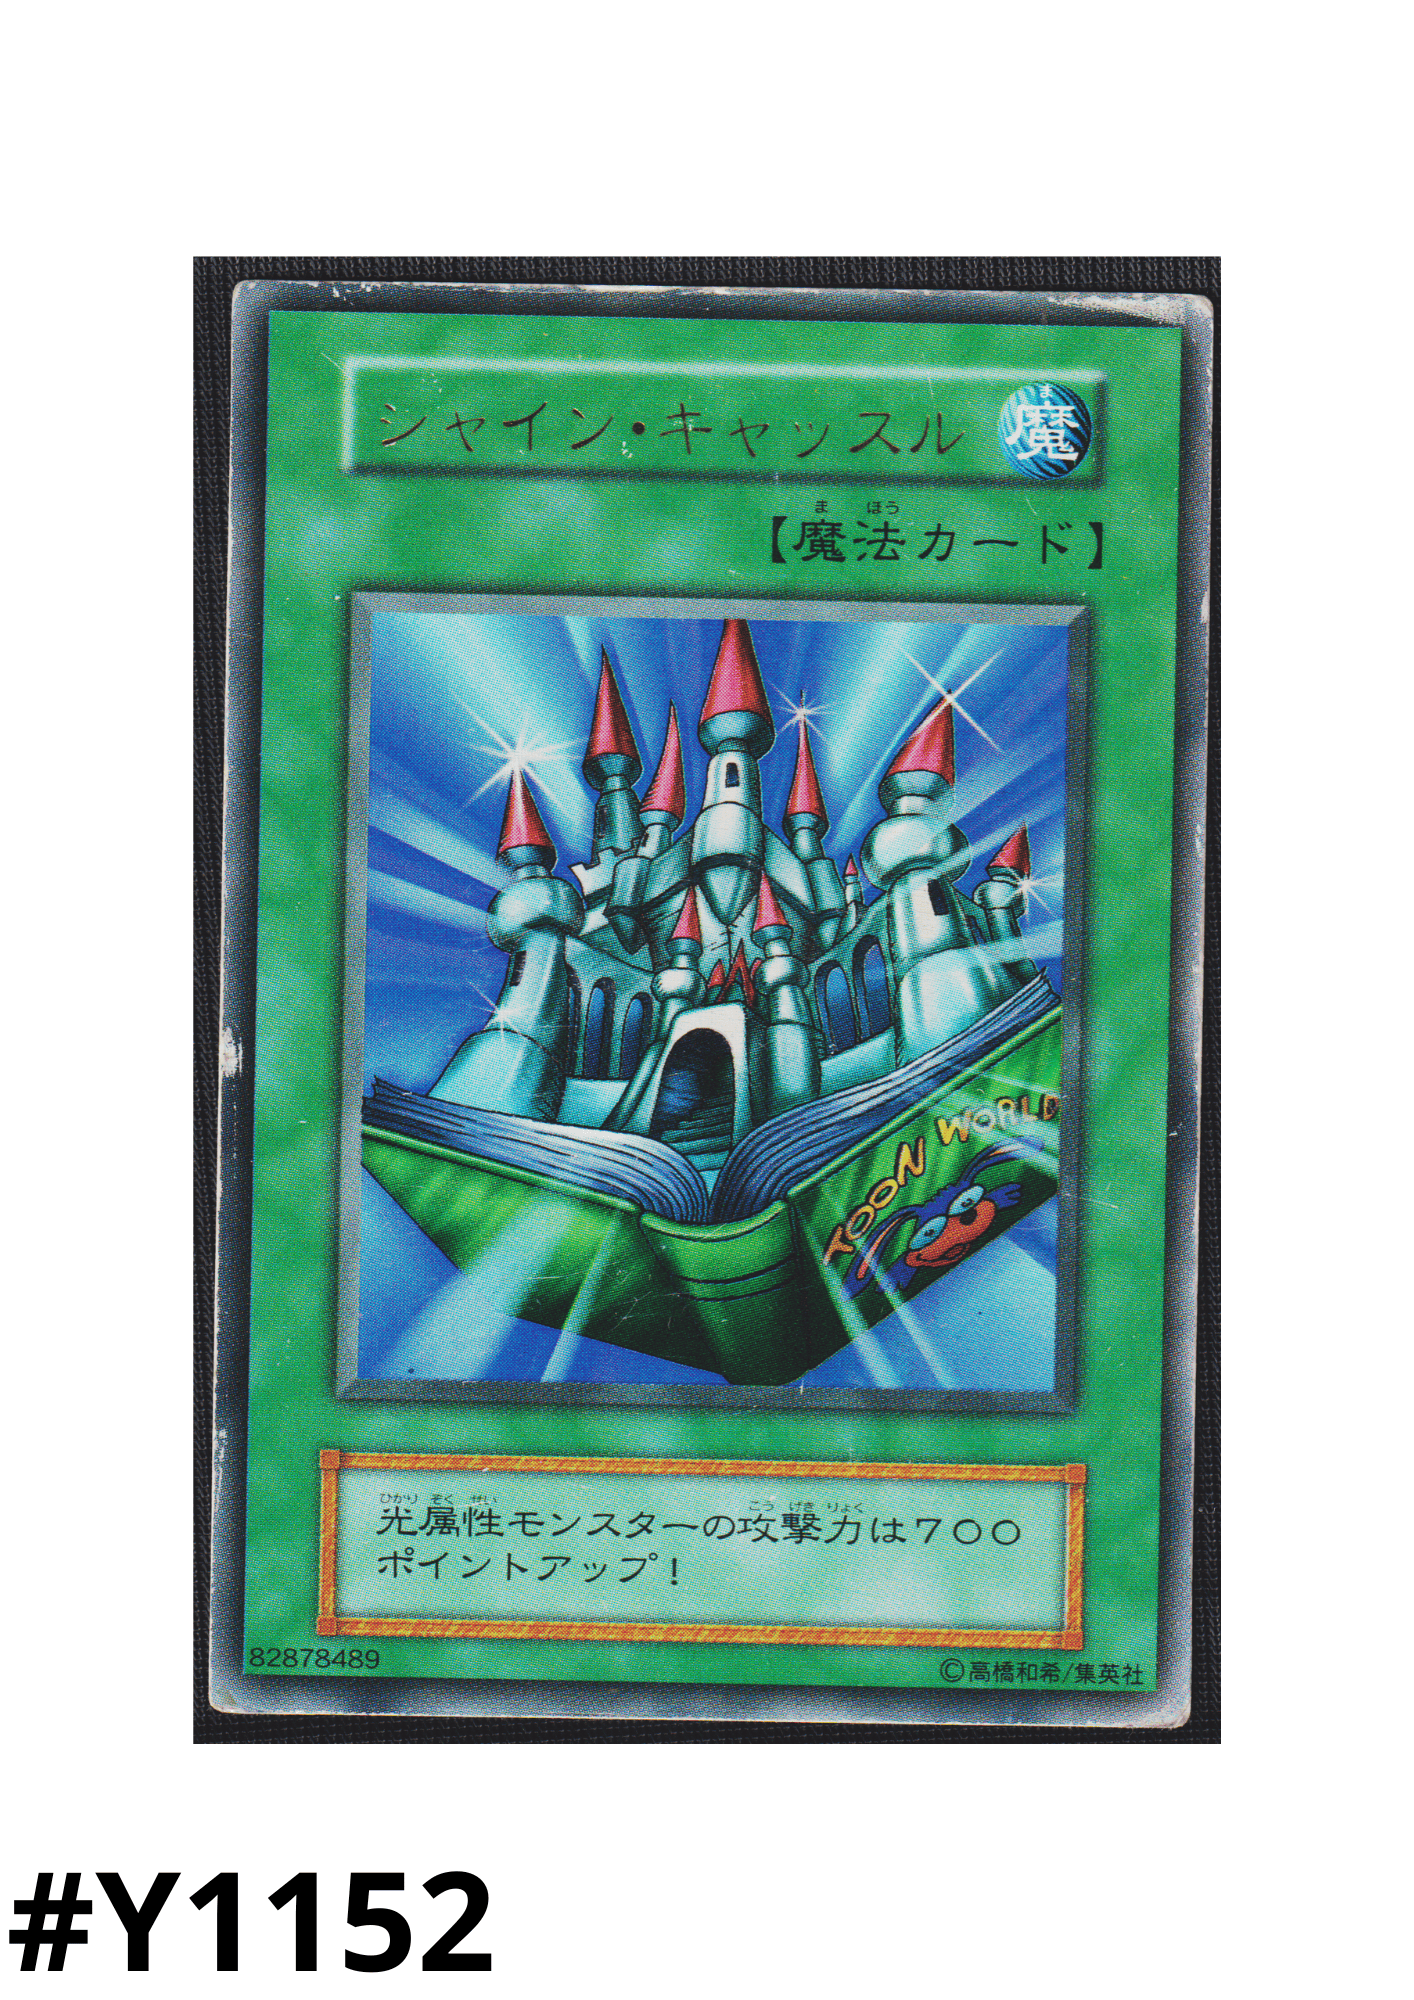 Shine Palace 	82878489 | Yu-Gi-Oh! Duel Monsters II: Dark duel Stories promotional cards